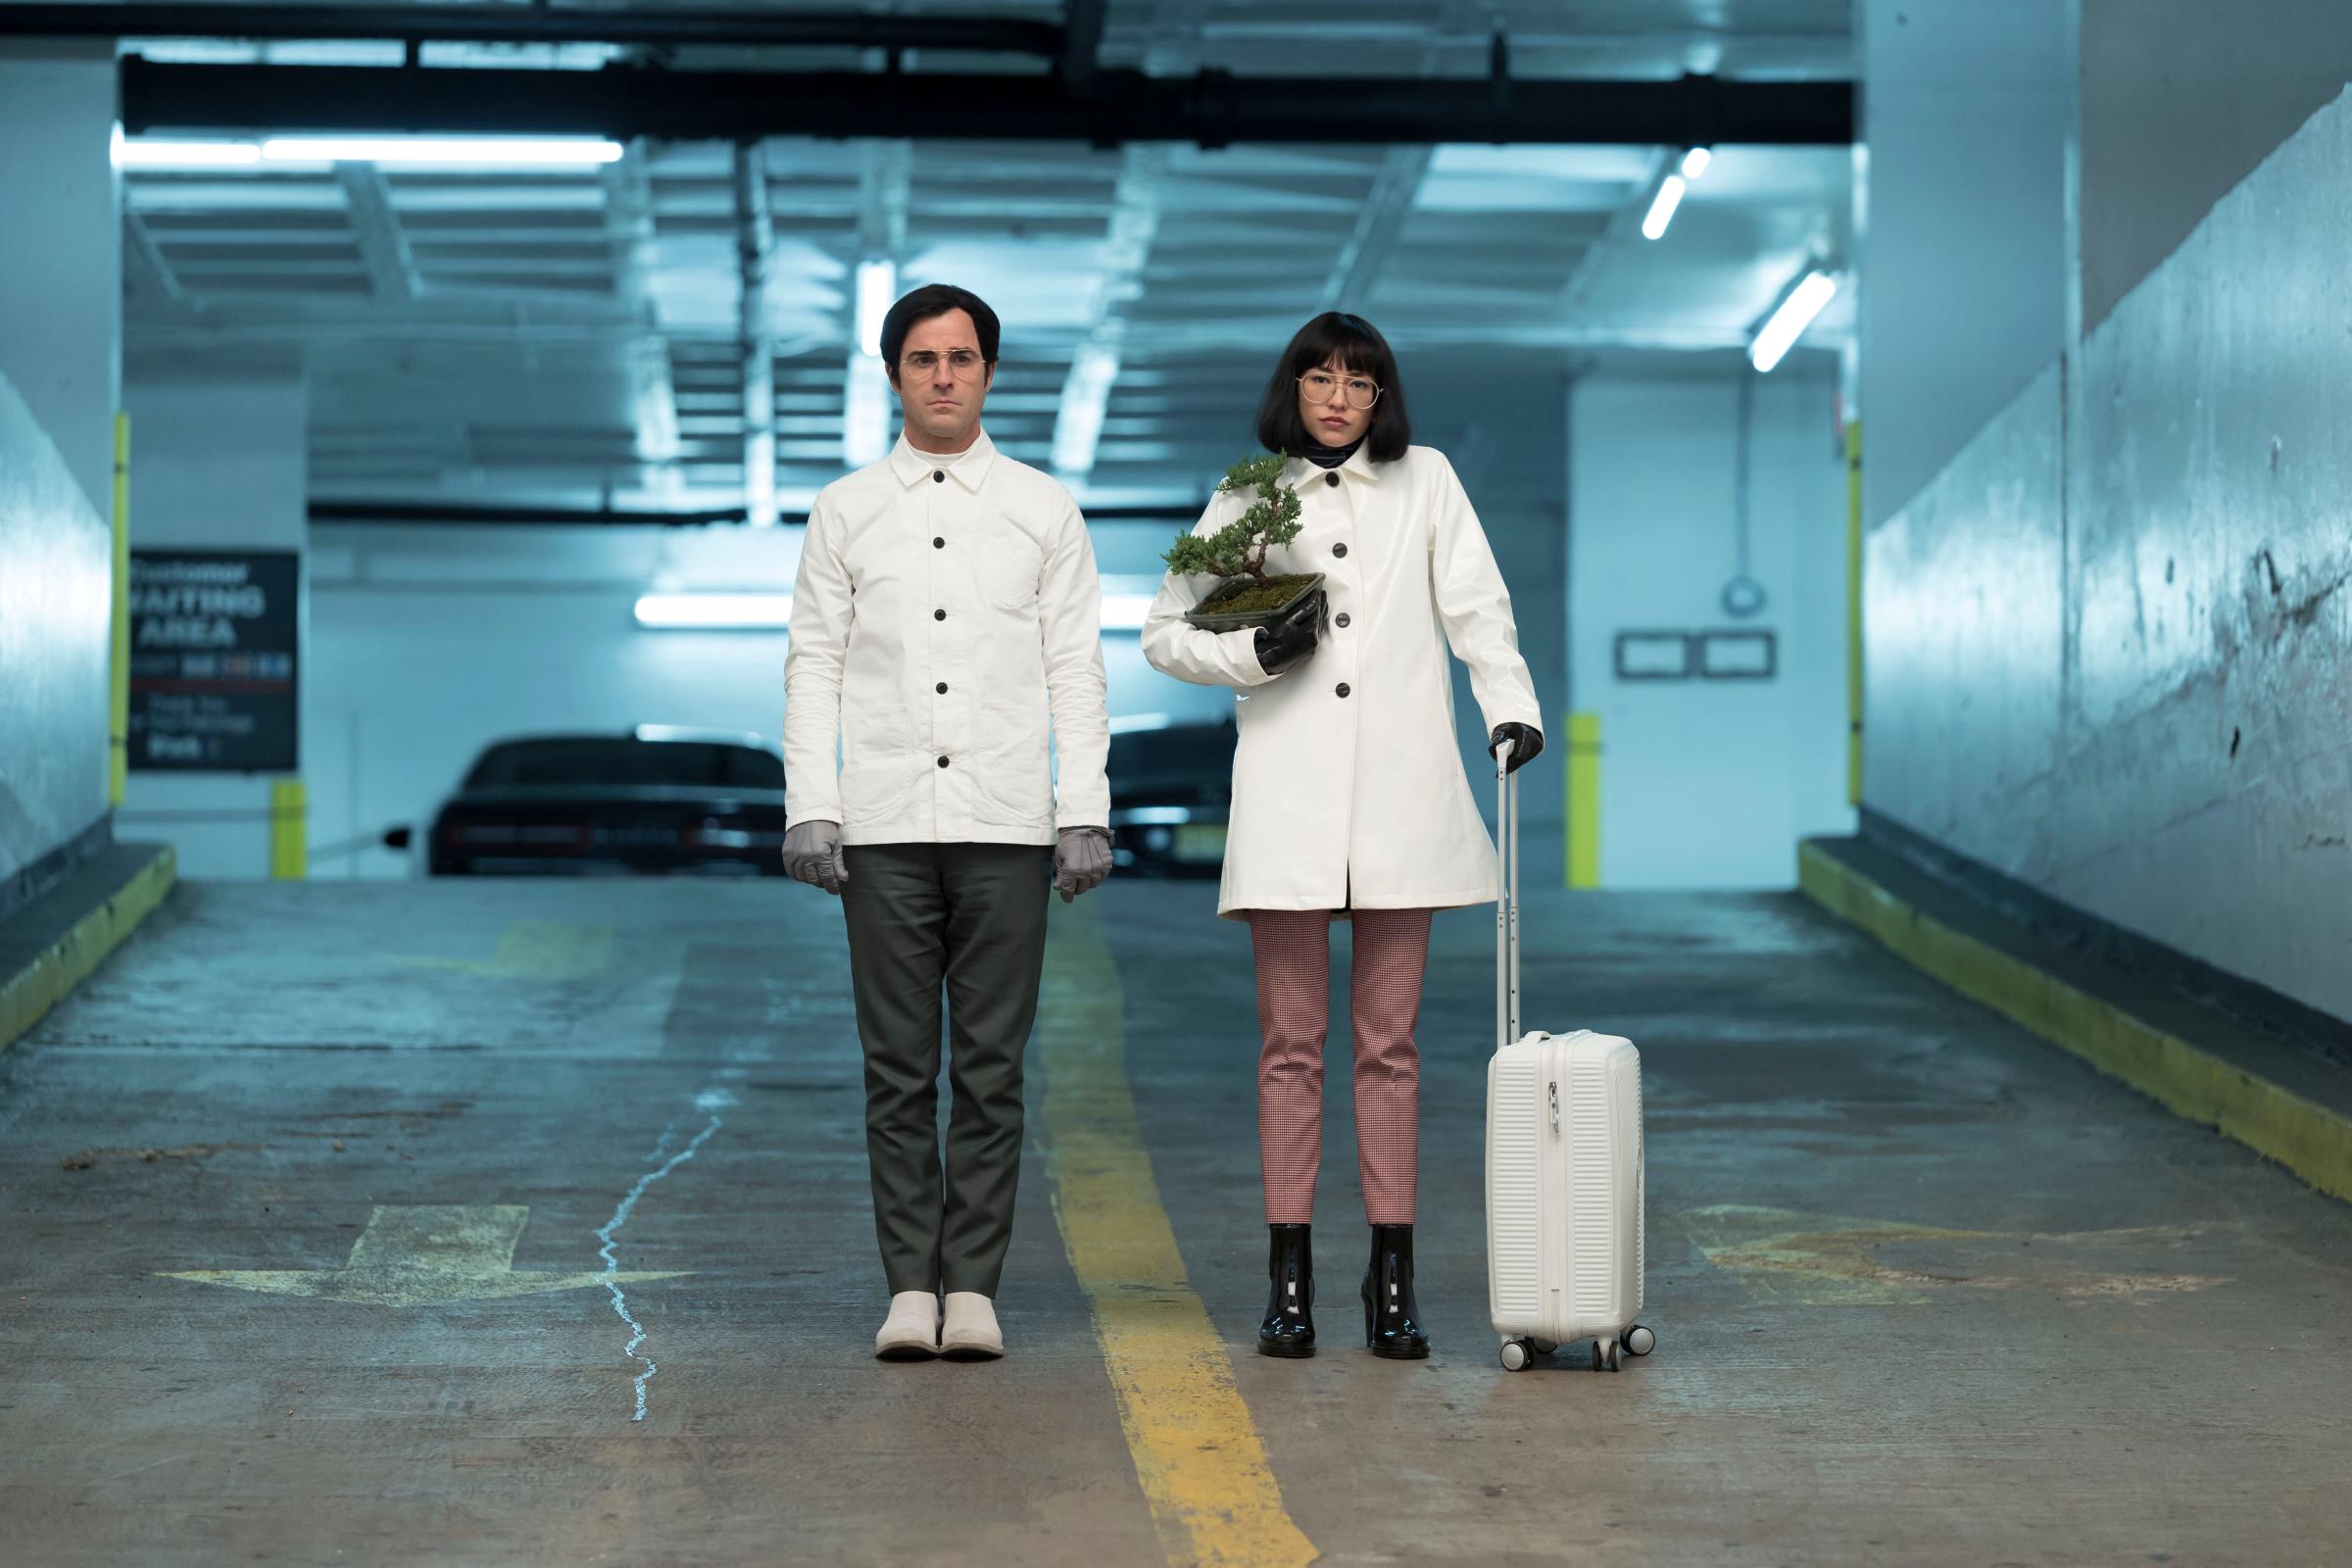 Justin Theroux and Sonoya Mizuno stand in front of a car